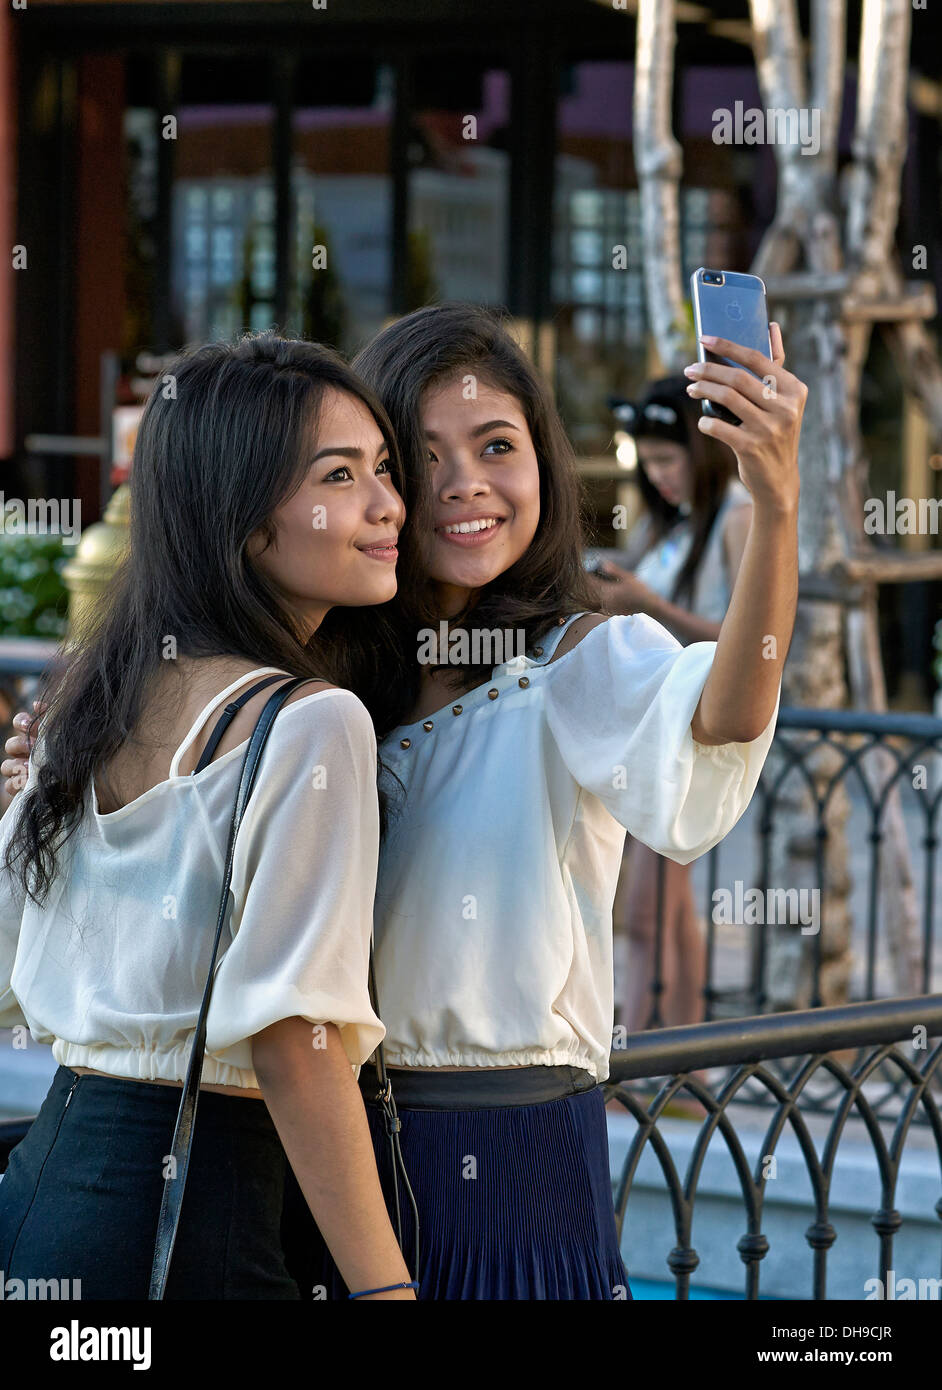 Selfie girls. Asian teenagers using a camera phone to take a self portrait known as a 'selfie'. Thailand S. E. Asia. Stock Photo